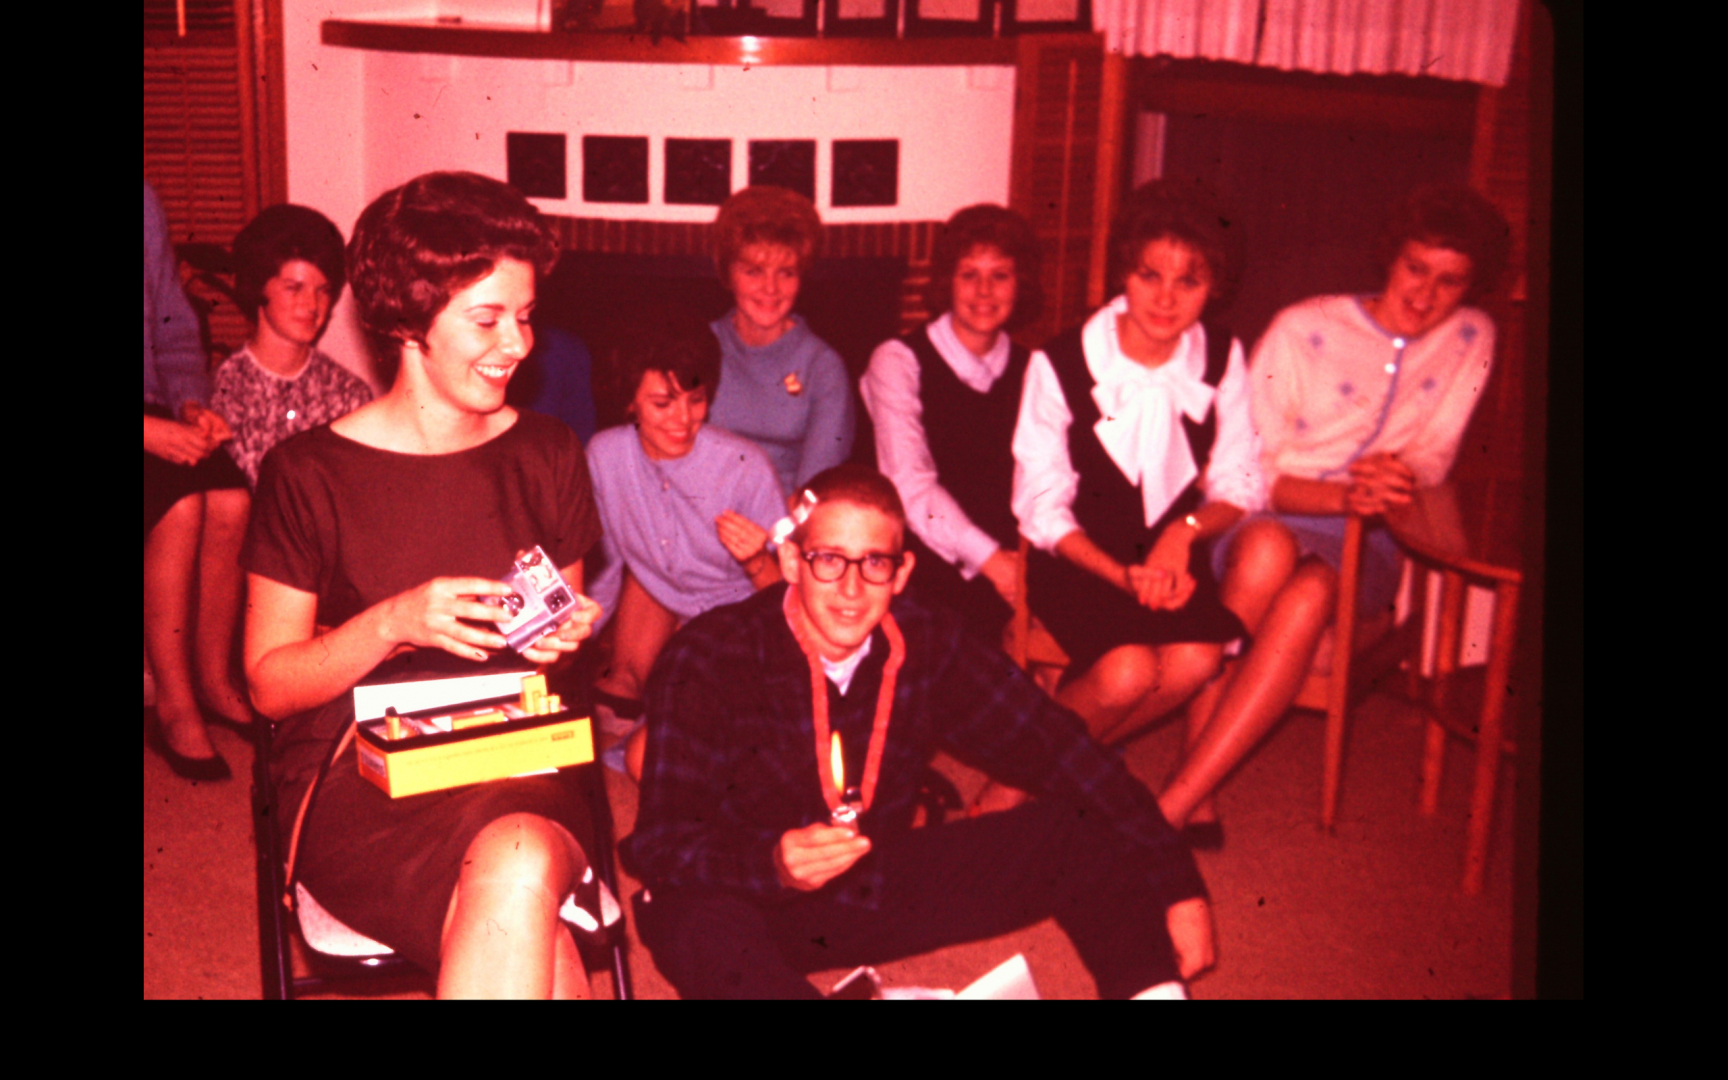 The classmates that I think can be identified are from L to R: Barbara Pullman, Margaret Narky, Donna Brown, Kay Anderson-Wiebe.  Kent Pullman is sitting on the floor.